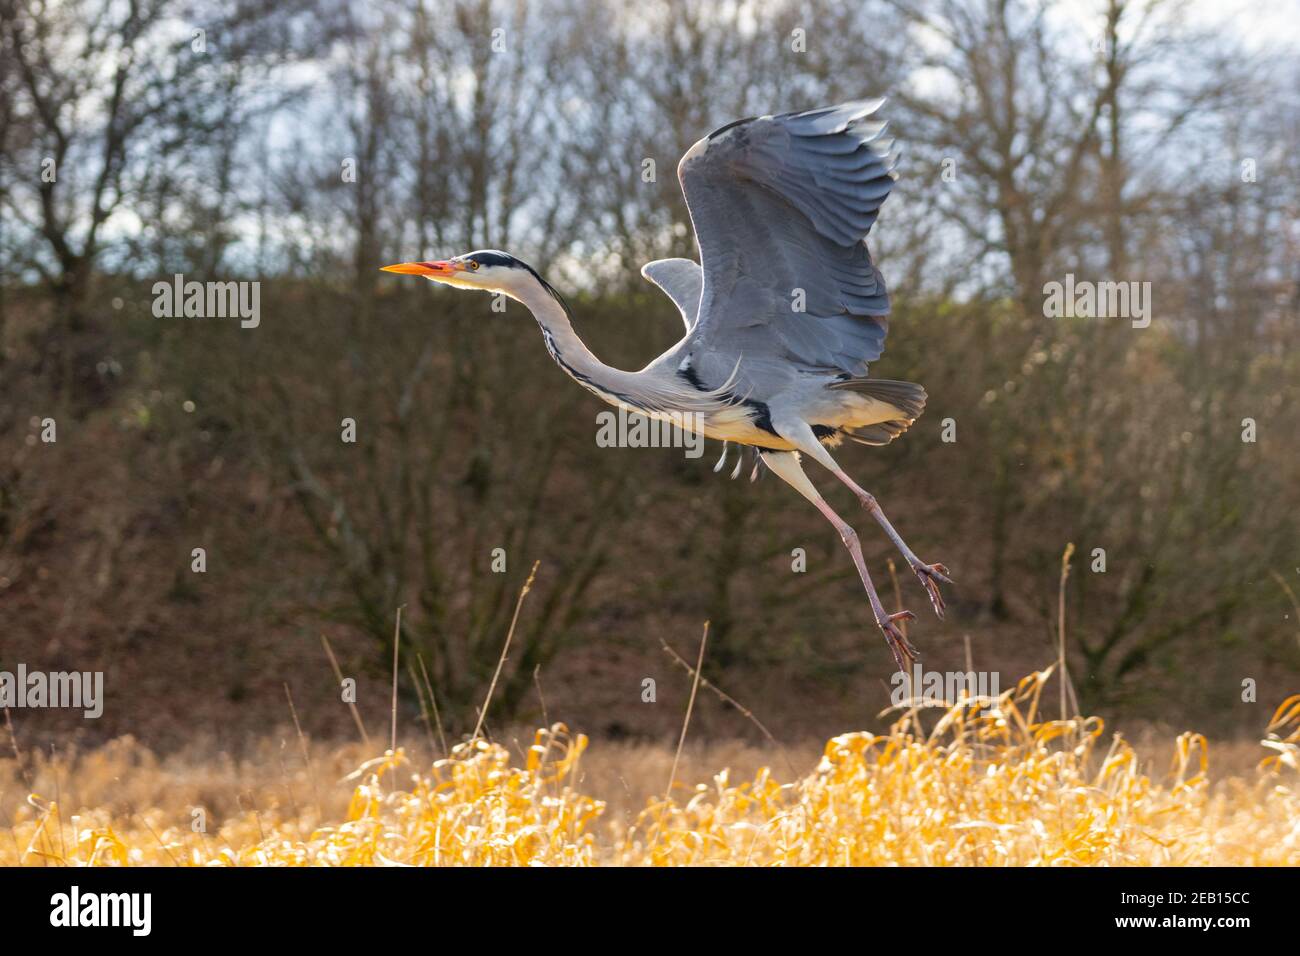 Grey Heron, Ardea Cinerea, taking flight, England, UK. Herons are large wading birds often seen fishing in water and have slow steady wingbeats. Stock Photo